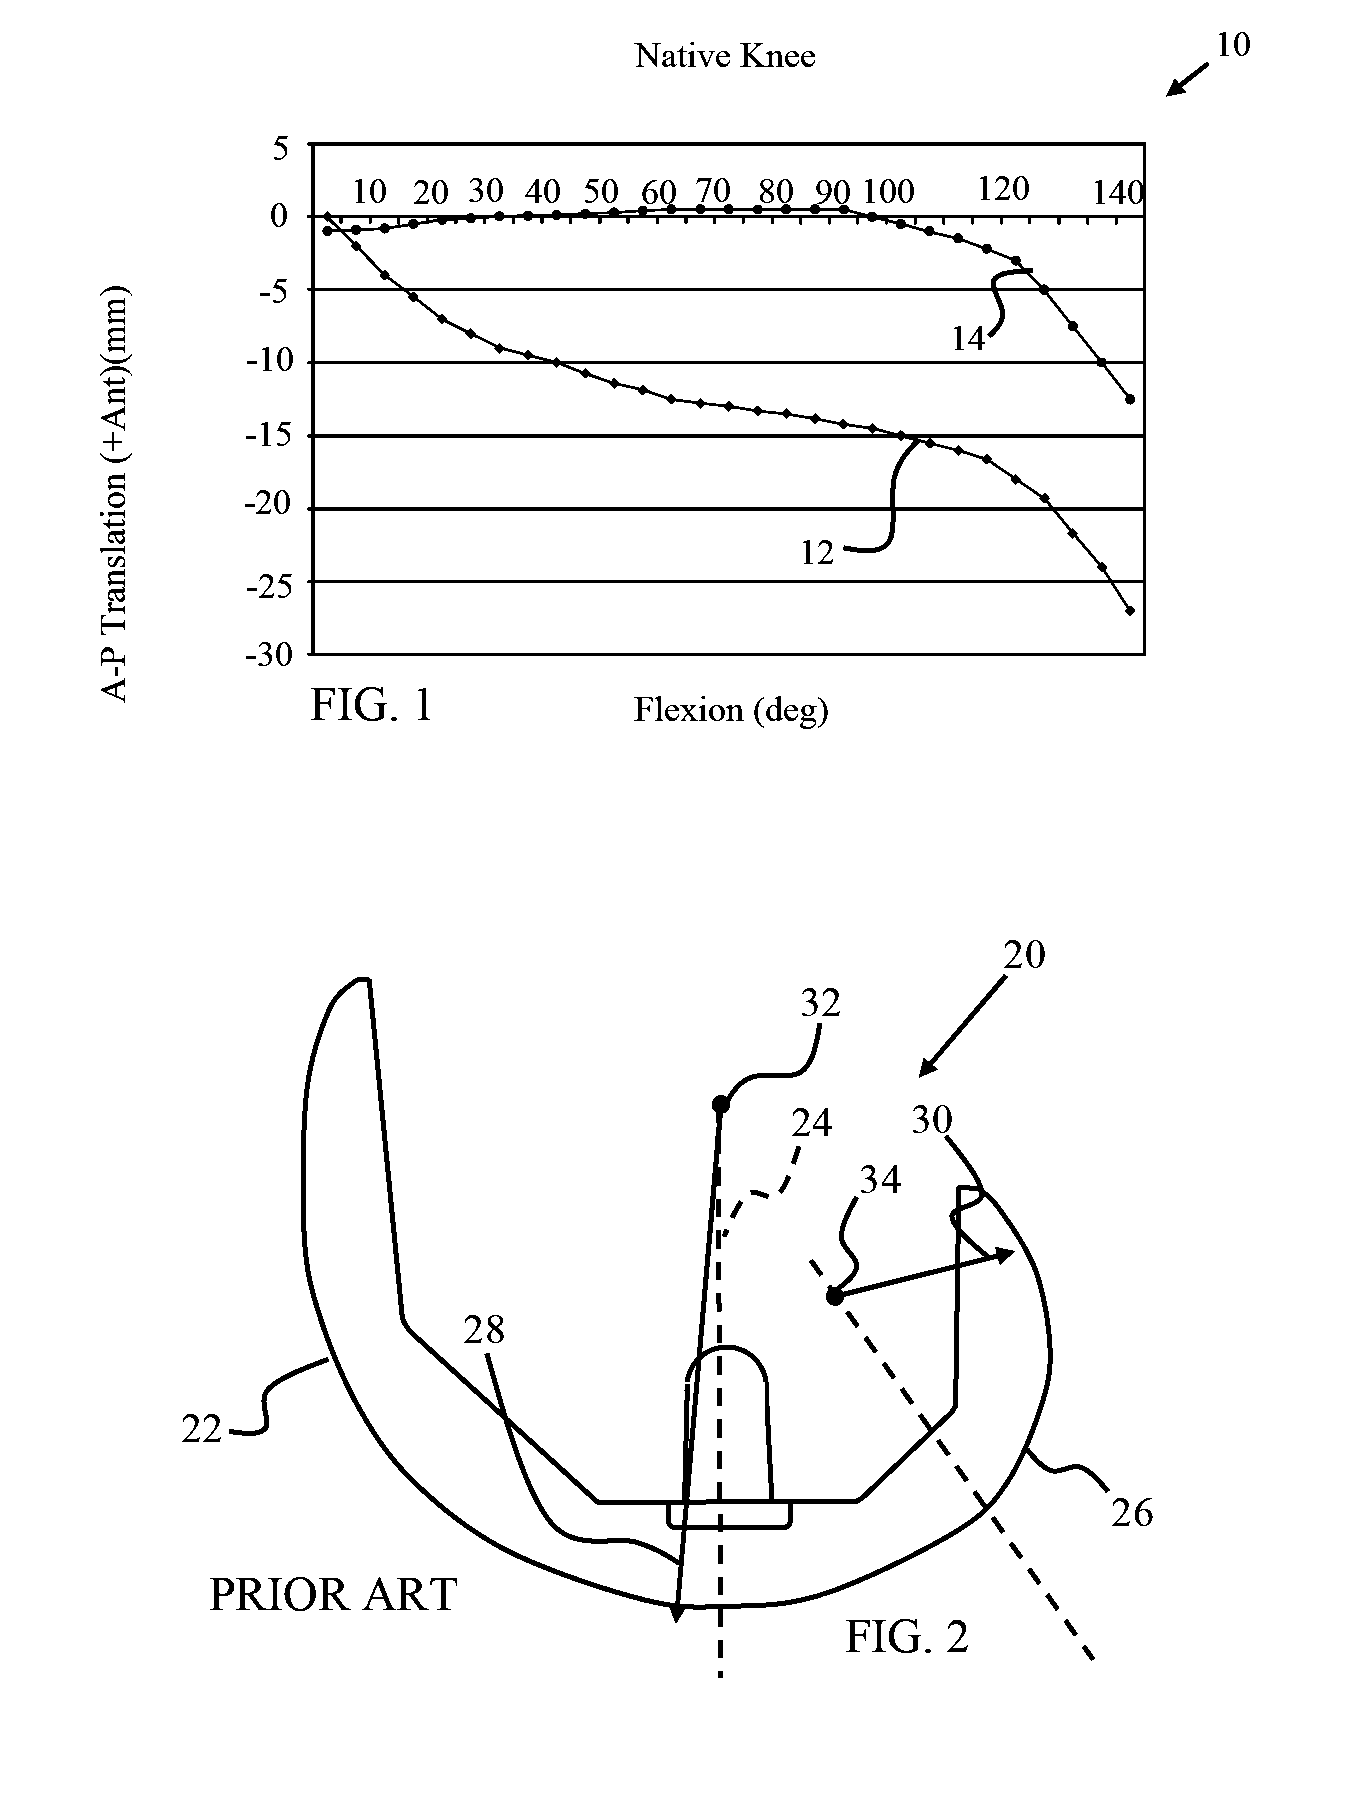 Antero-posterior placement of axis of rotation for a rotating platform